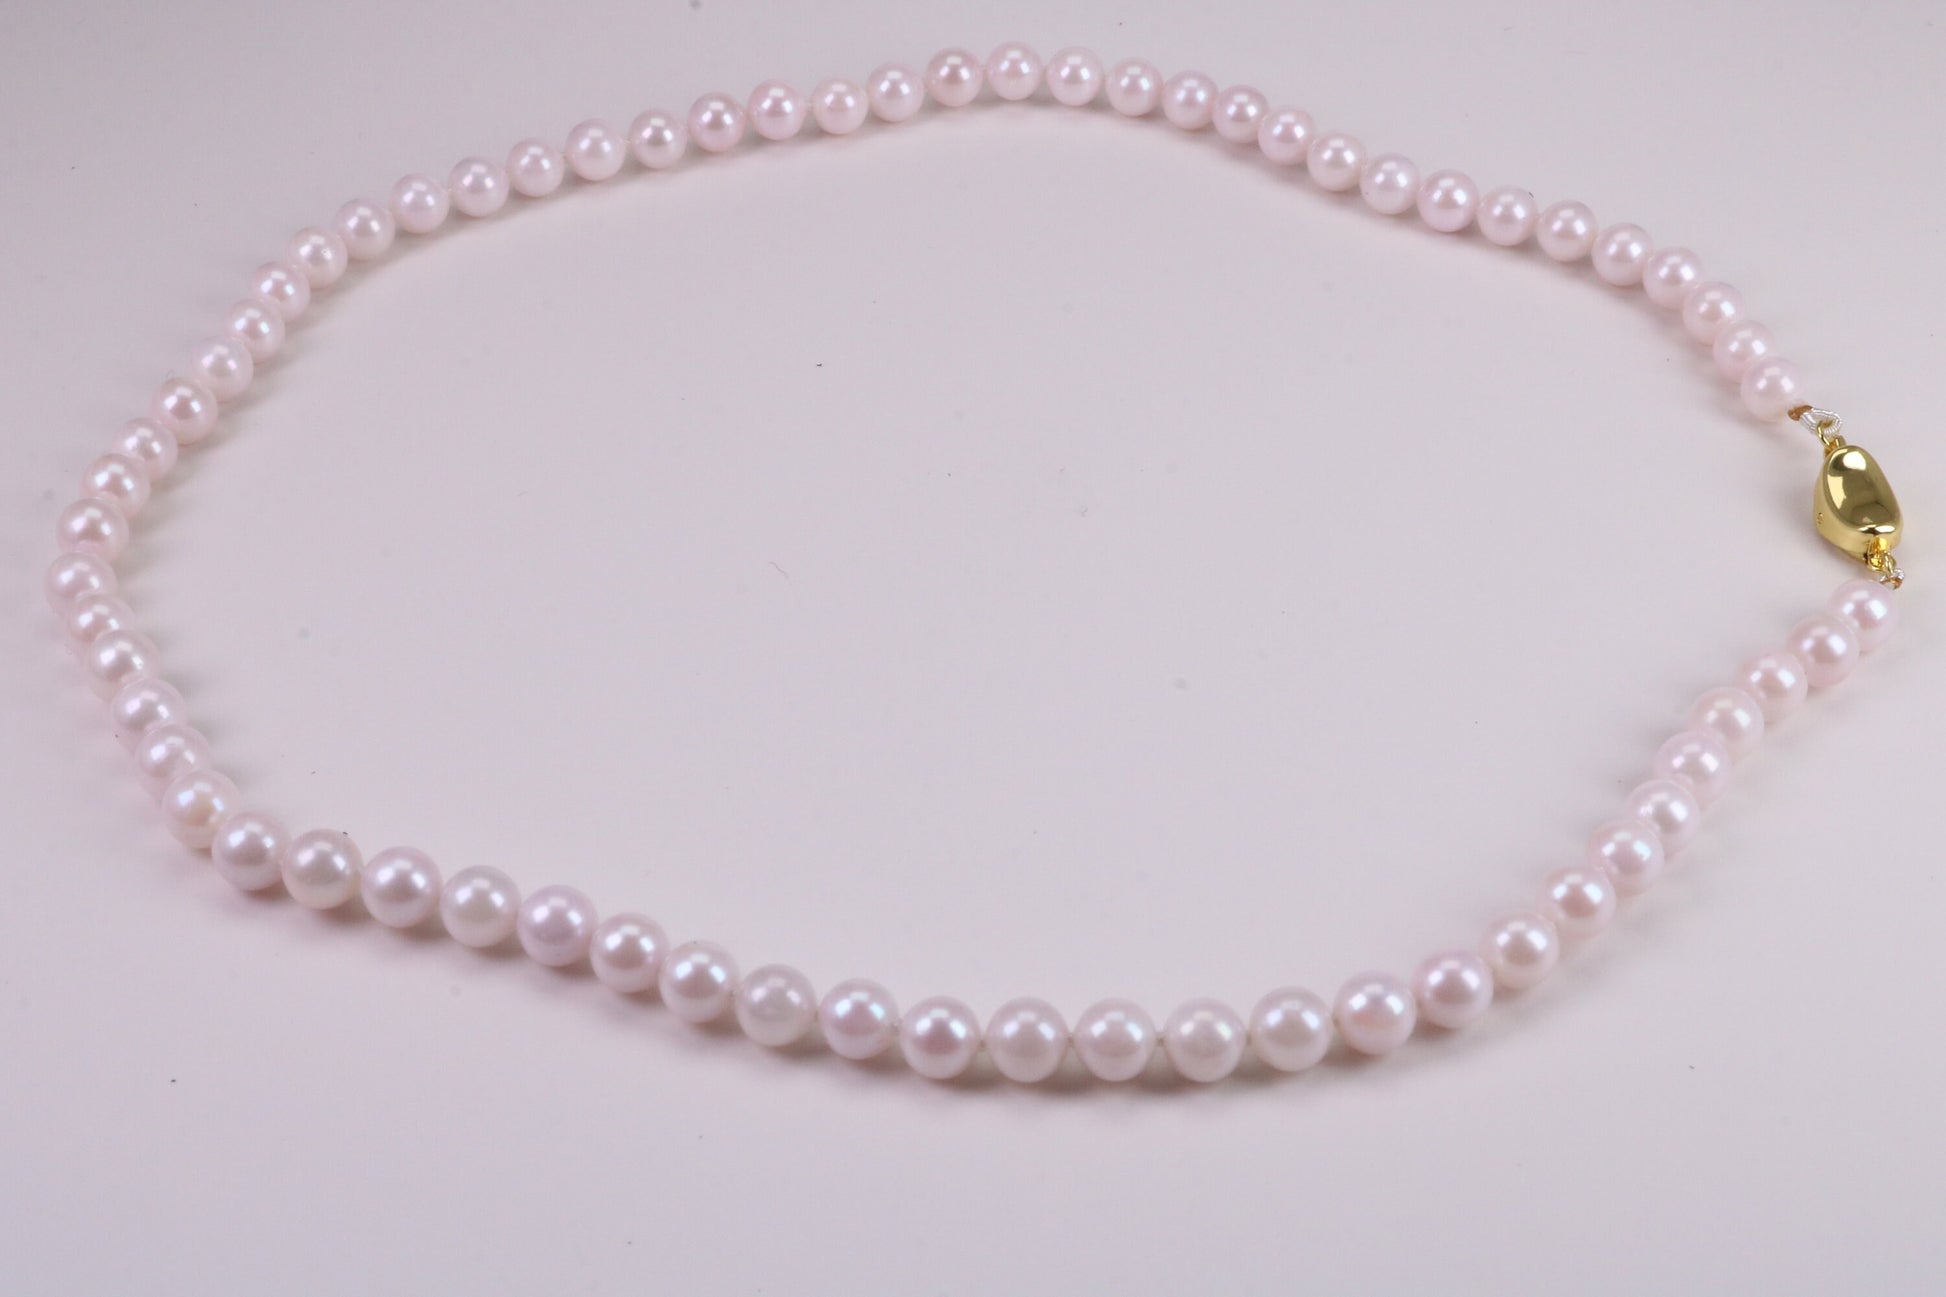 Beautiful South Sea Akoya Pearl Necklace, set with Silver Yellow Gold Plated Clasp, 6-6.50 mm Akoya Pearl, 16 inch Long Strands